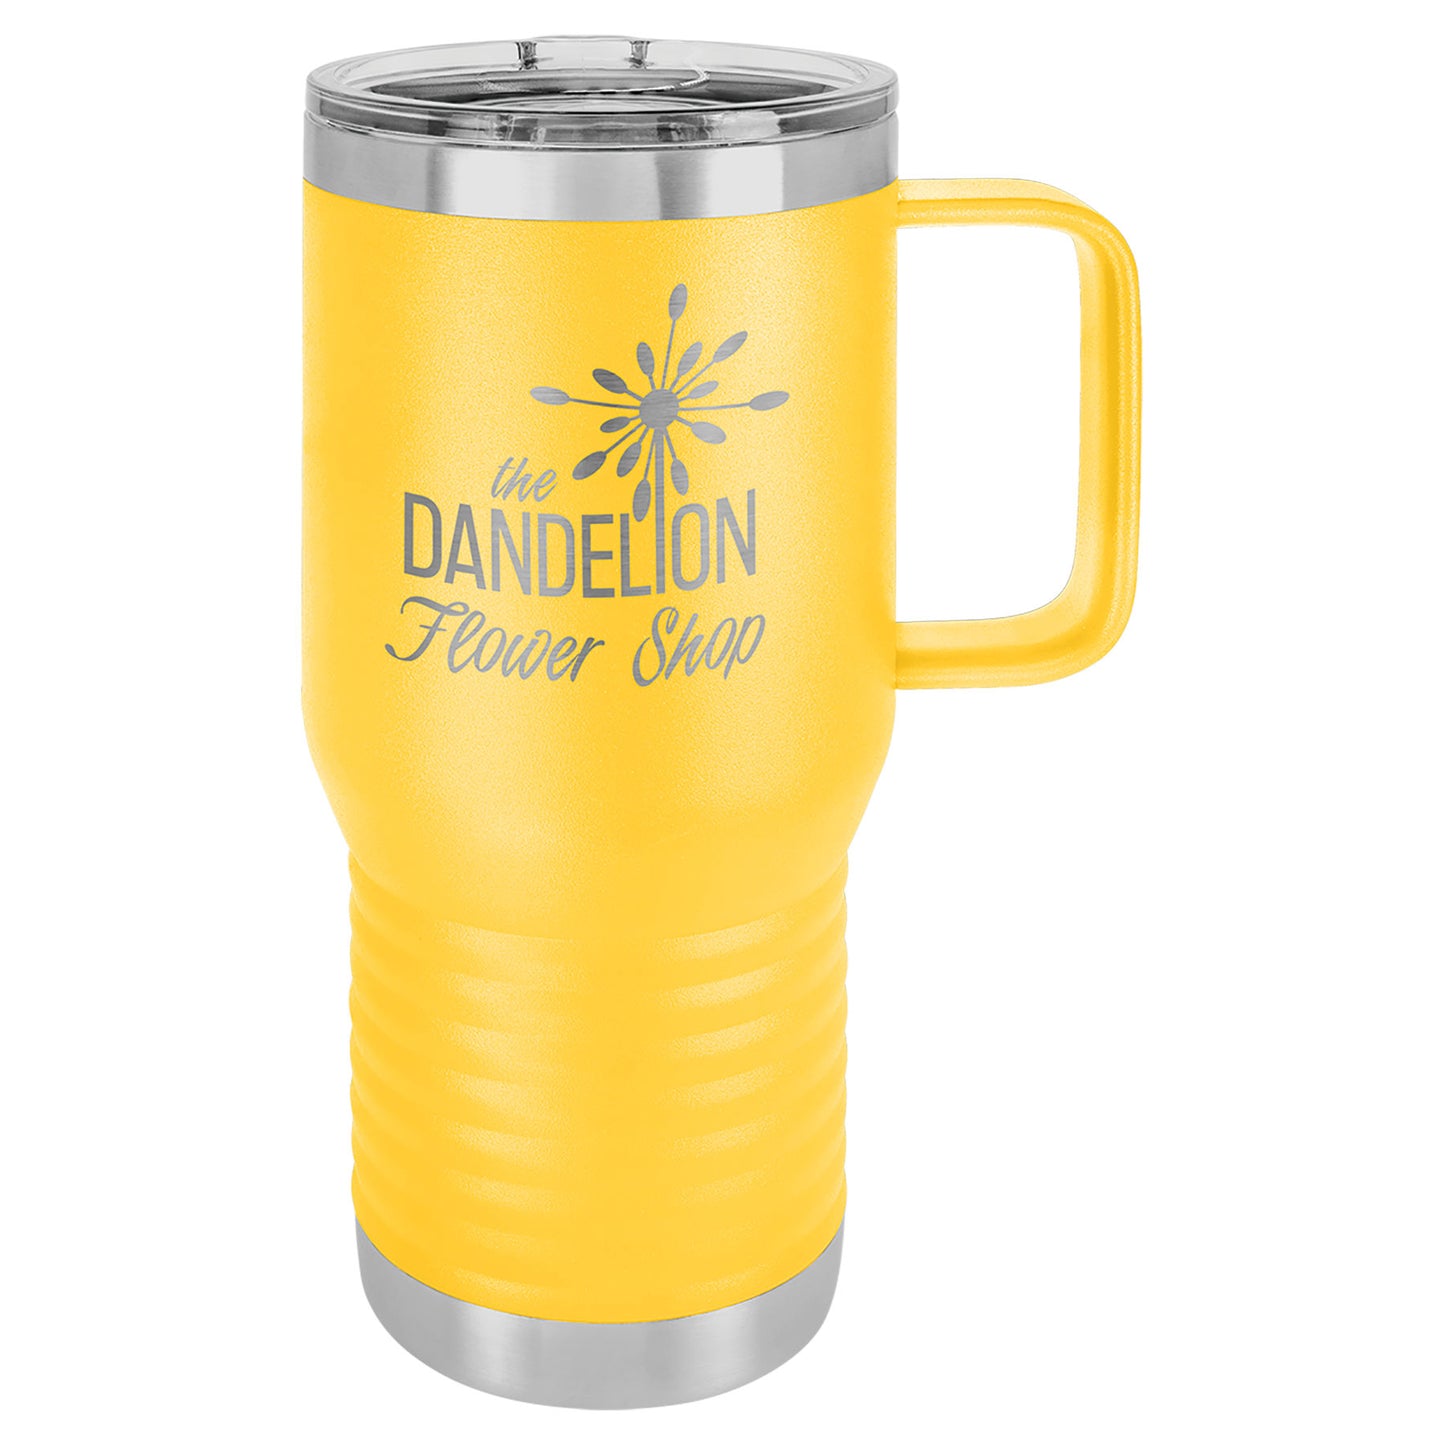 Stainless Steel Insulated Coffee Mug with Slider Lid